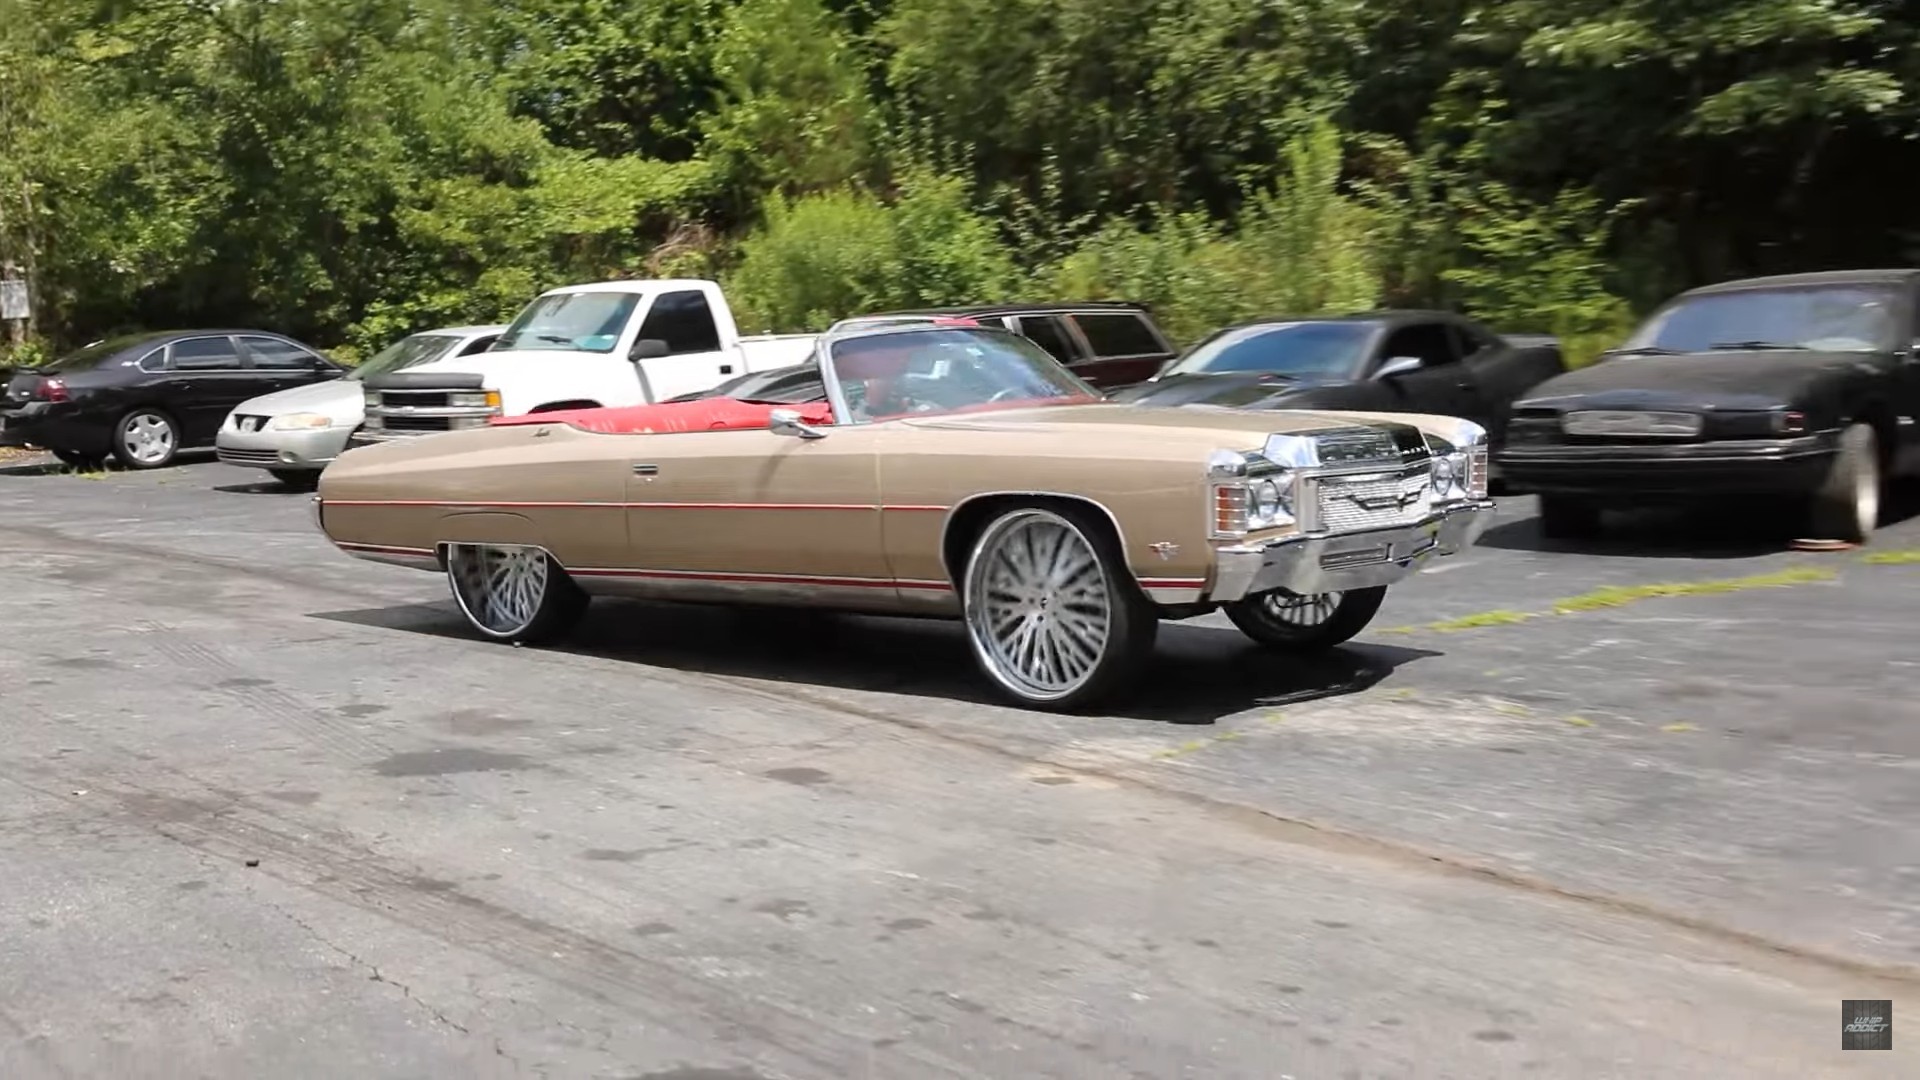 1971 Chevy Impala Vert Goes Mega Donk With 383 Swap To Supercharged.